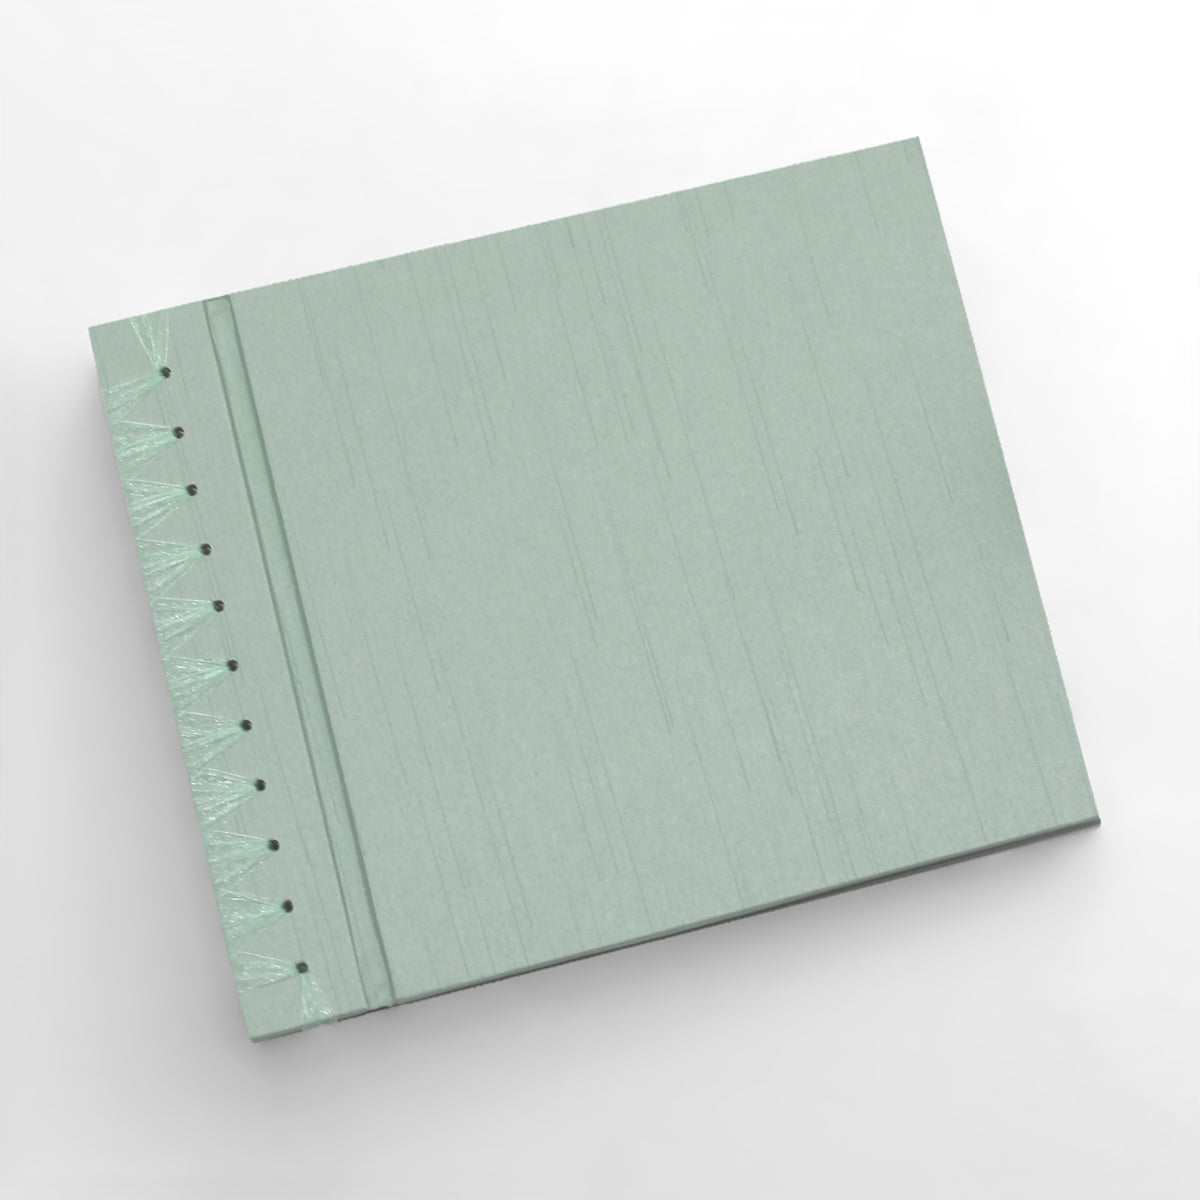 Deluxe 12 x 15 Paper Page Album | Cover: Misty Blue Silk | Available Personalized